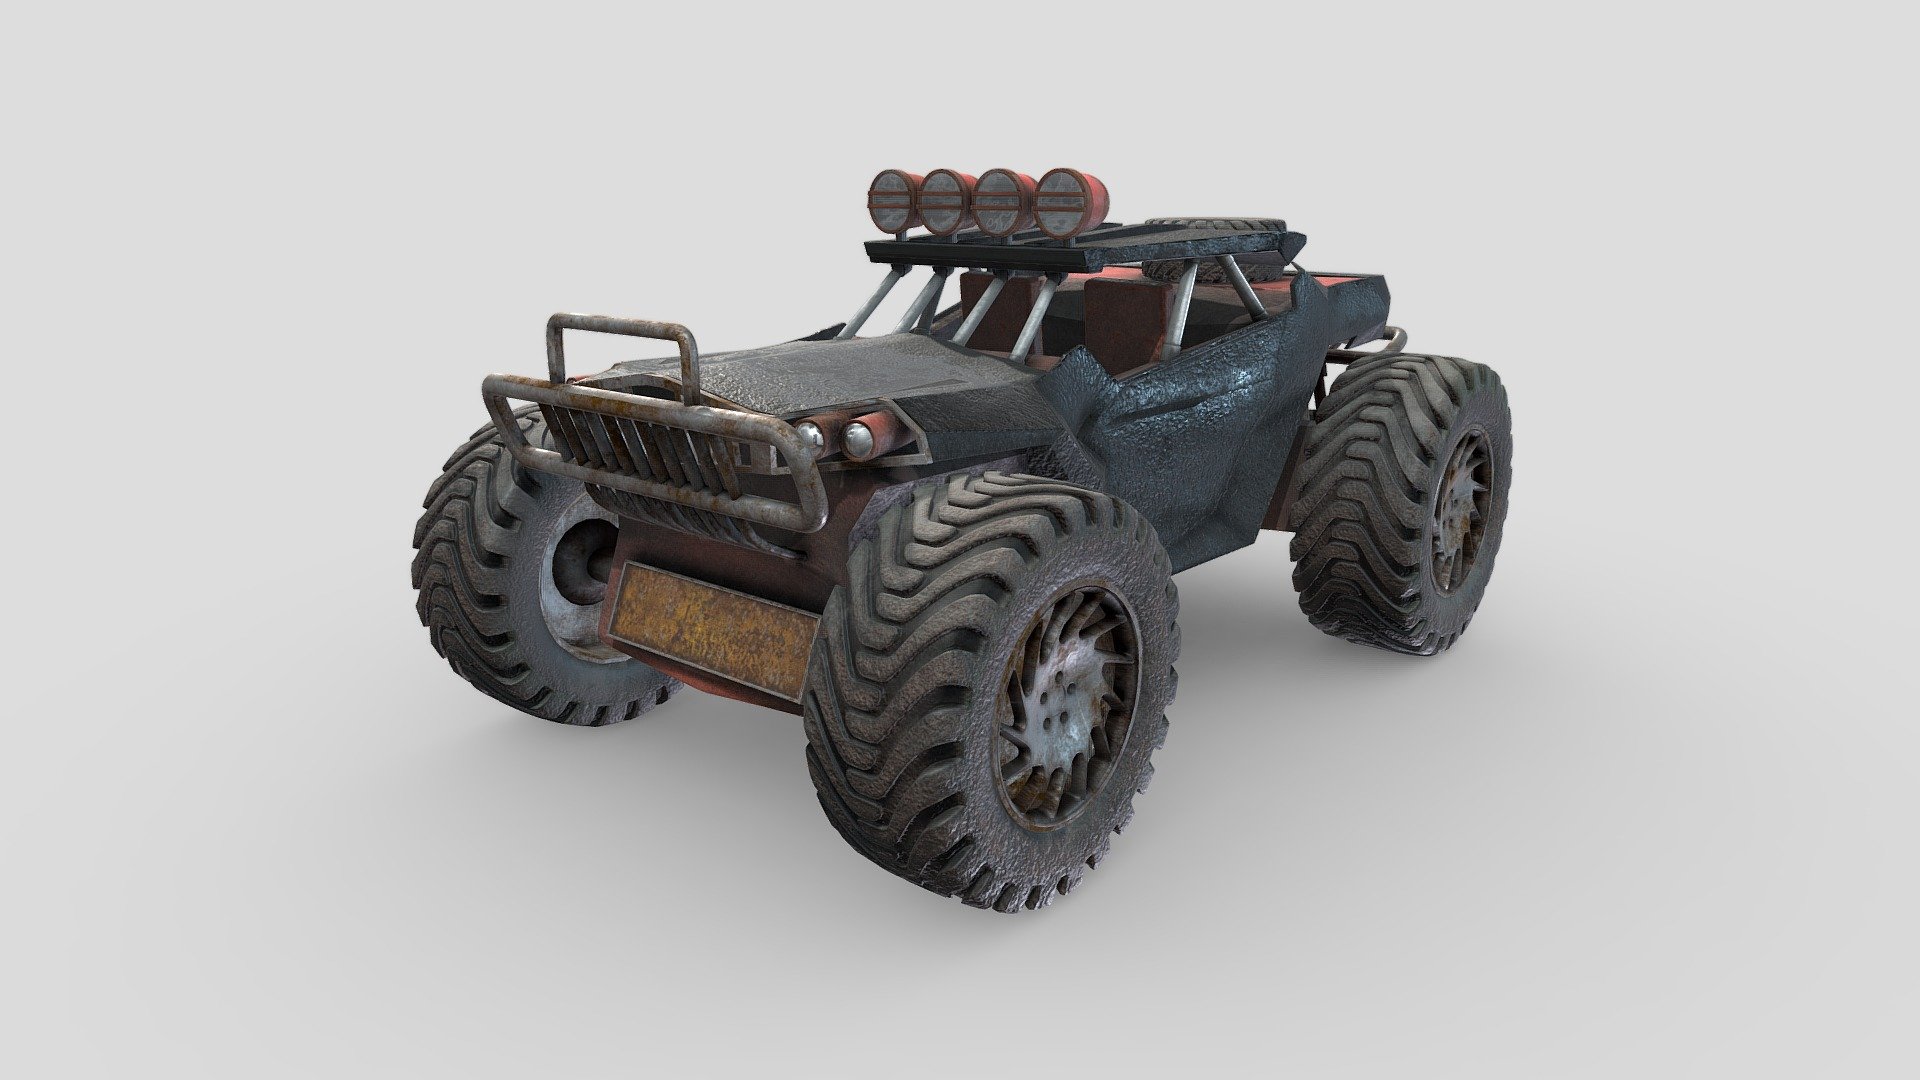 3D Model of Monster Truck.
Compatible in all 3D Programs, like Maya, 3Ds max, Unreal Engine 4
Compatible with all types of offline/online render engines, game engines, cinema render engines, realtime render engines.
PBR-Metallic texture workflow.
Includes Basecolor, Metallic, Roughness, Normal, AO

Substance Project Link :- https://www.artstation.com/artwork/48PEGn

Render Iray:-
 - Monster Truck 3D Model - Buy Royalty Free 3D model by Mohammad Aquib (@mdaquibxxx) 3d model